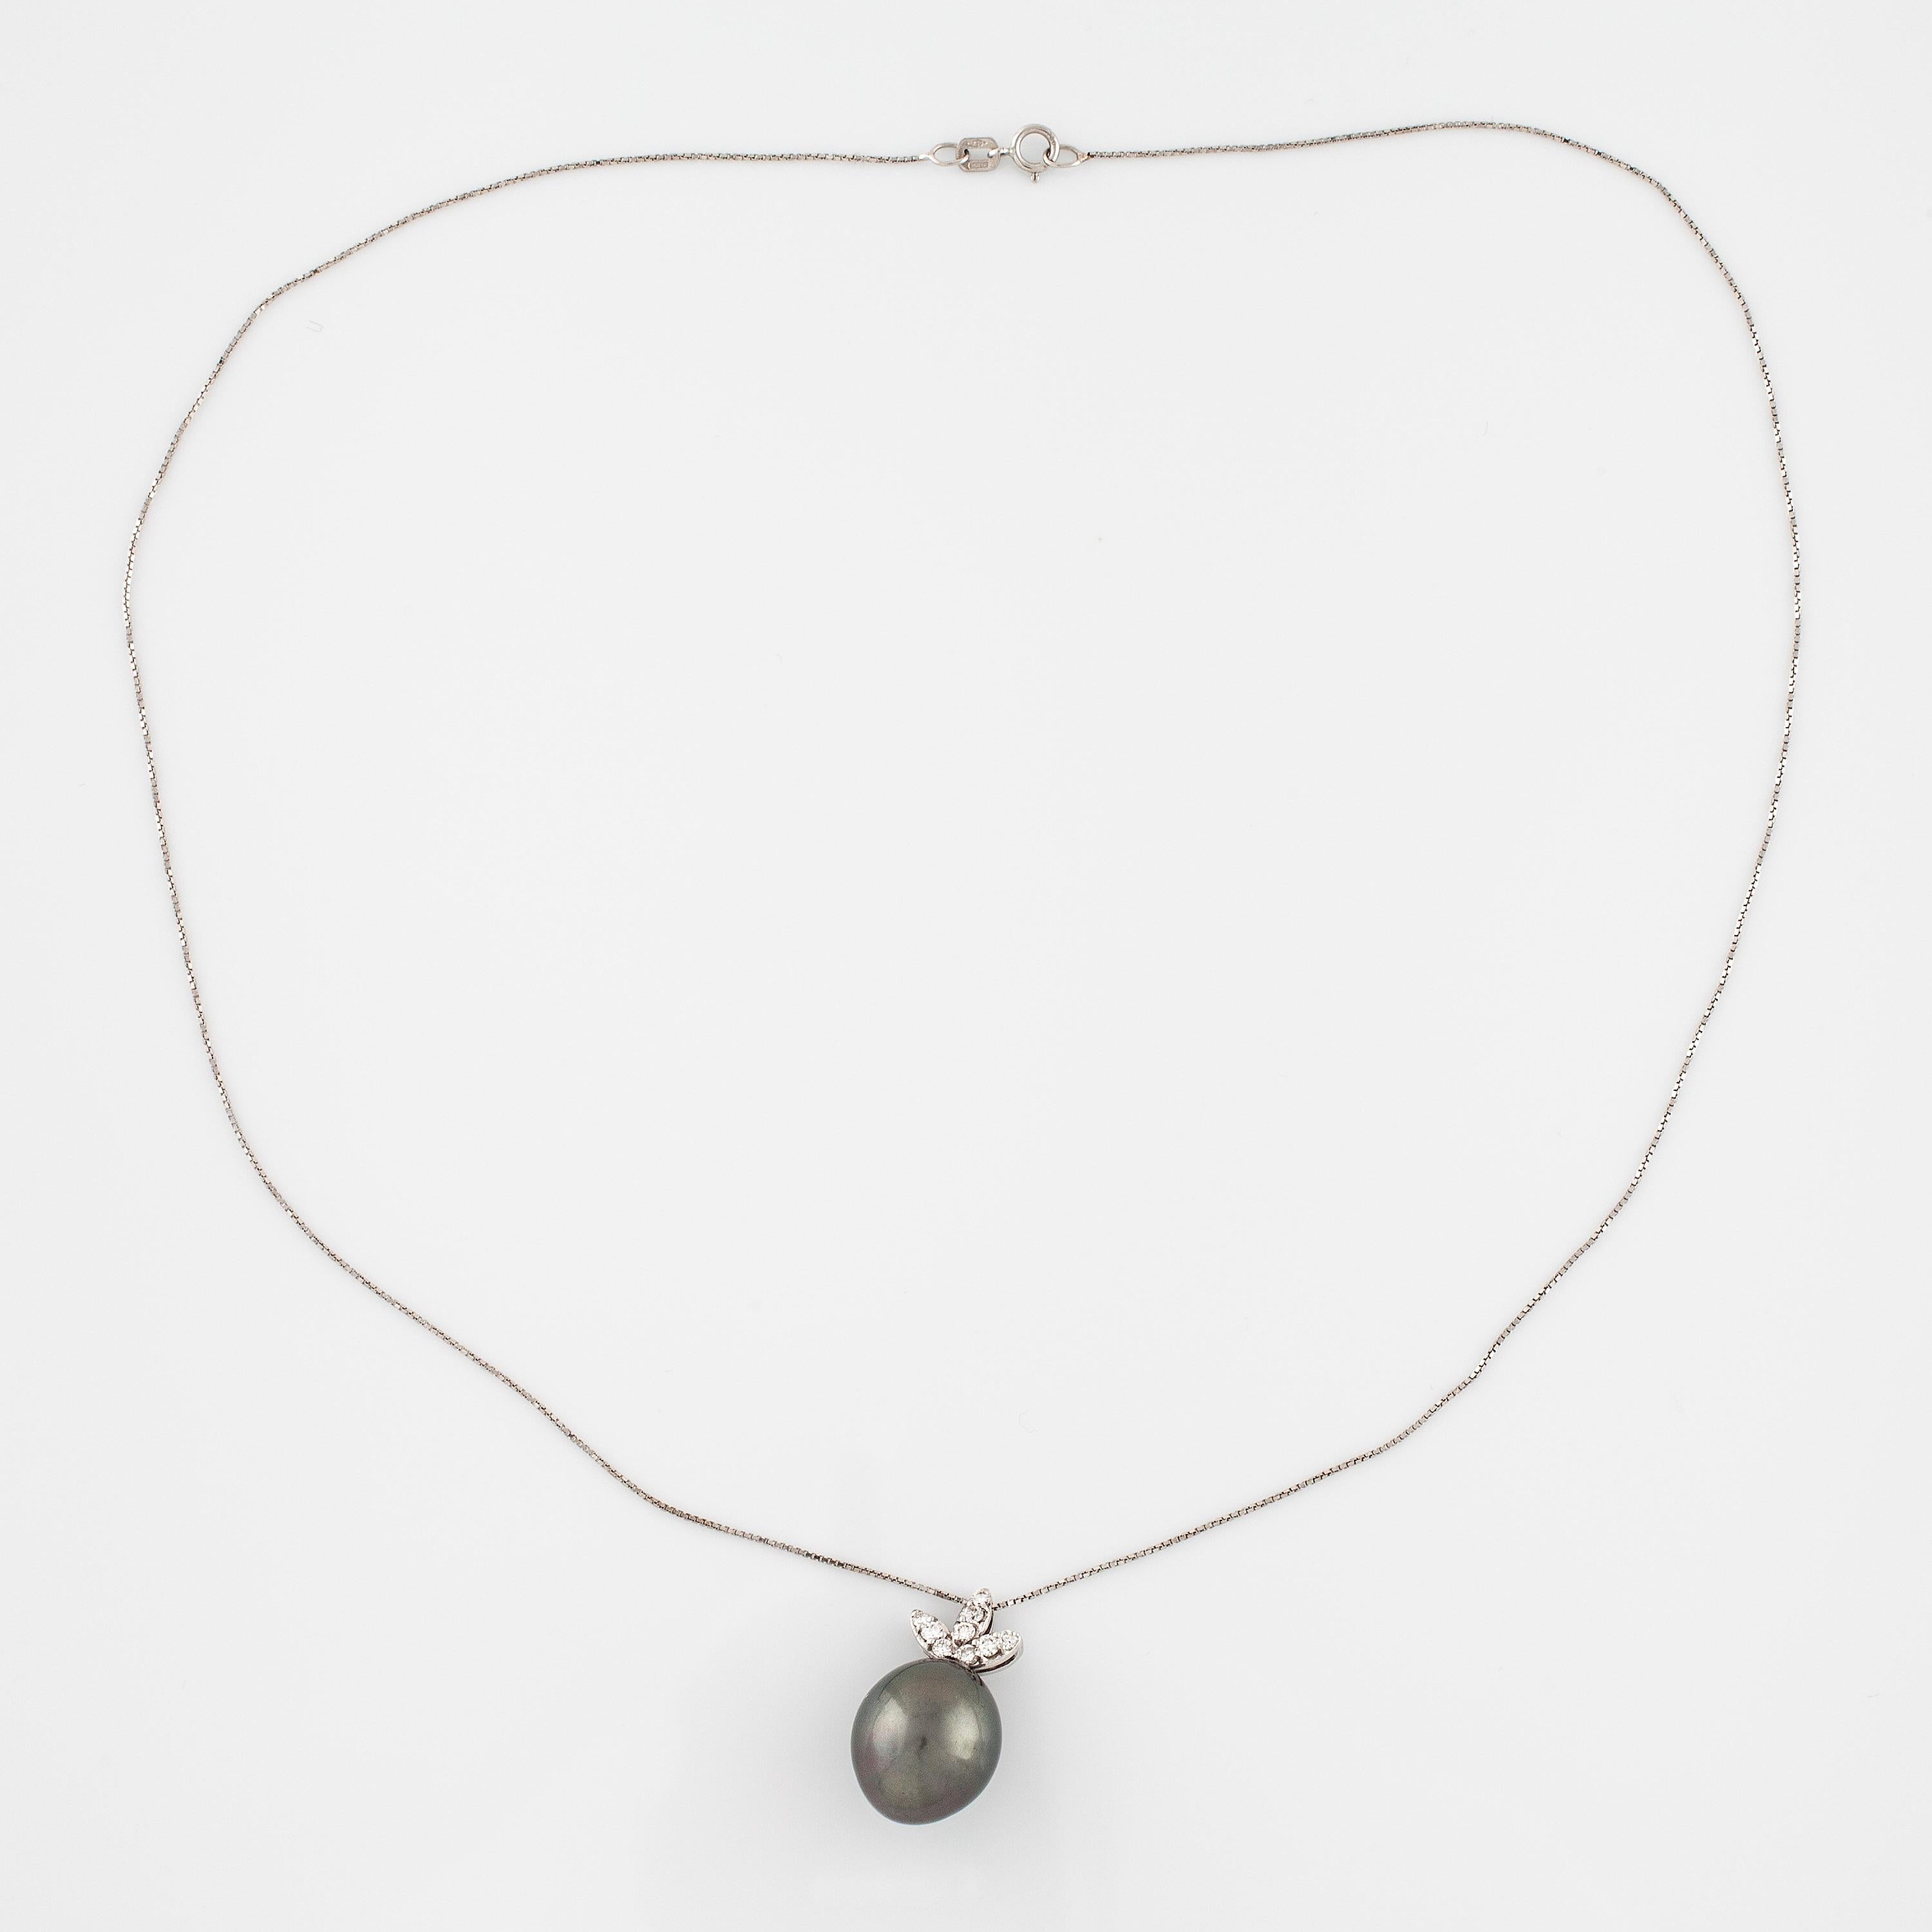 Wonderful and classic necklace in 18K white gold with a thin chain and a tasteful pendant. The pendant has a cultured Tahitian pearl in a beautiful color and brilliant cut diamonds. The necklace is perfect for all types of occasions and has a